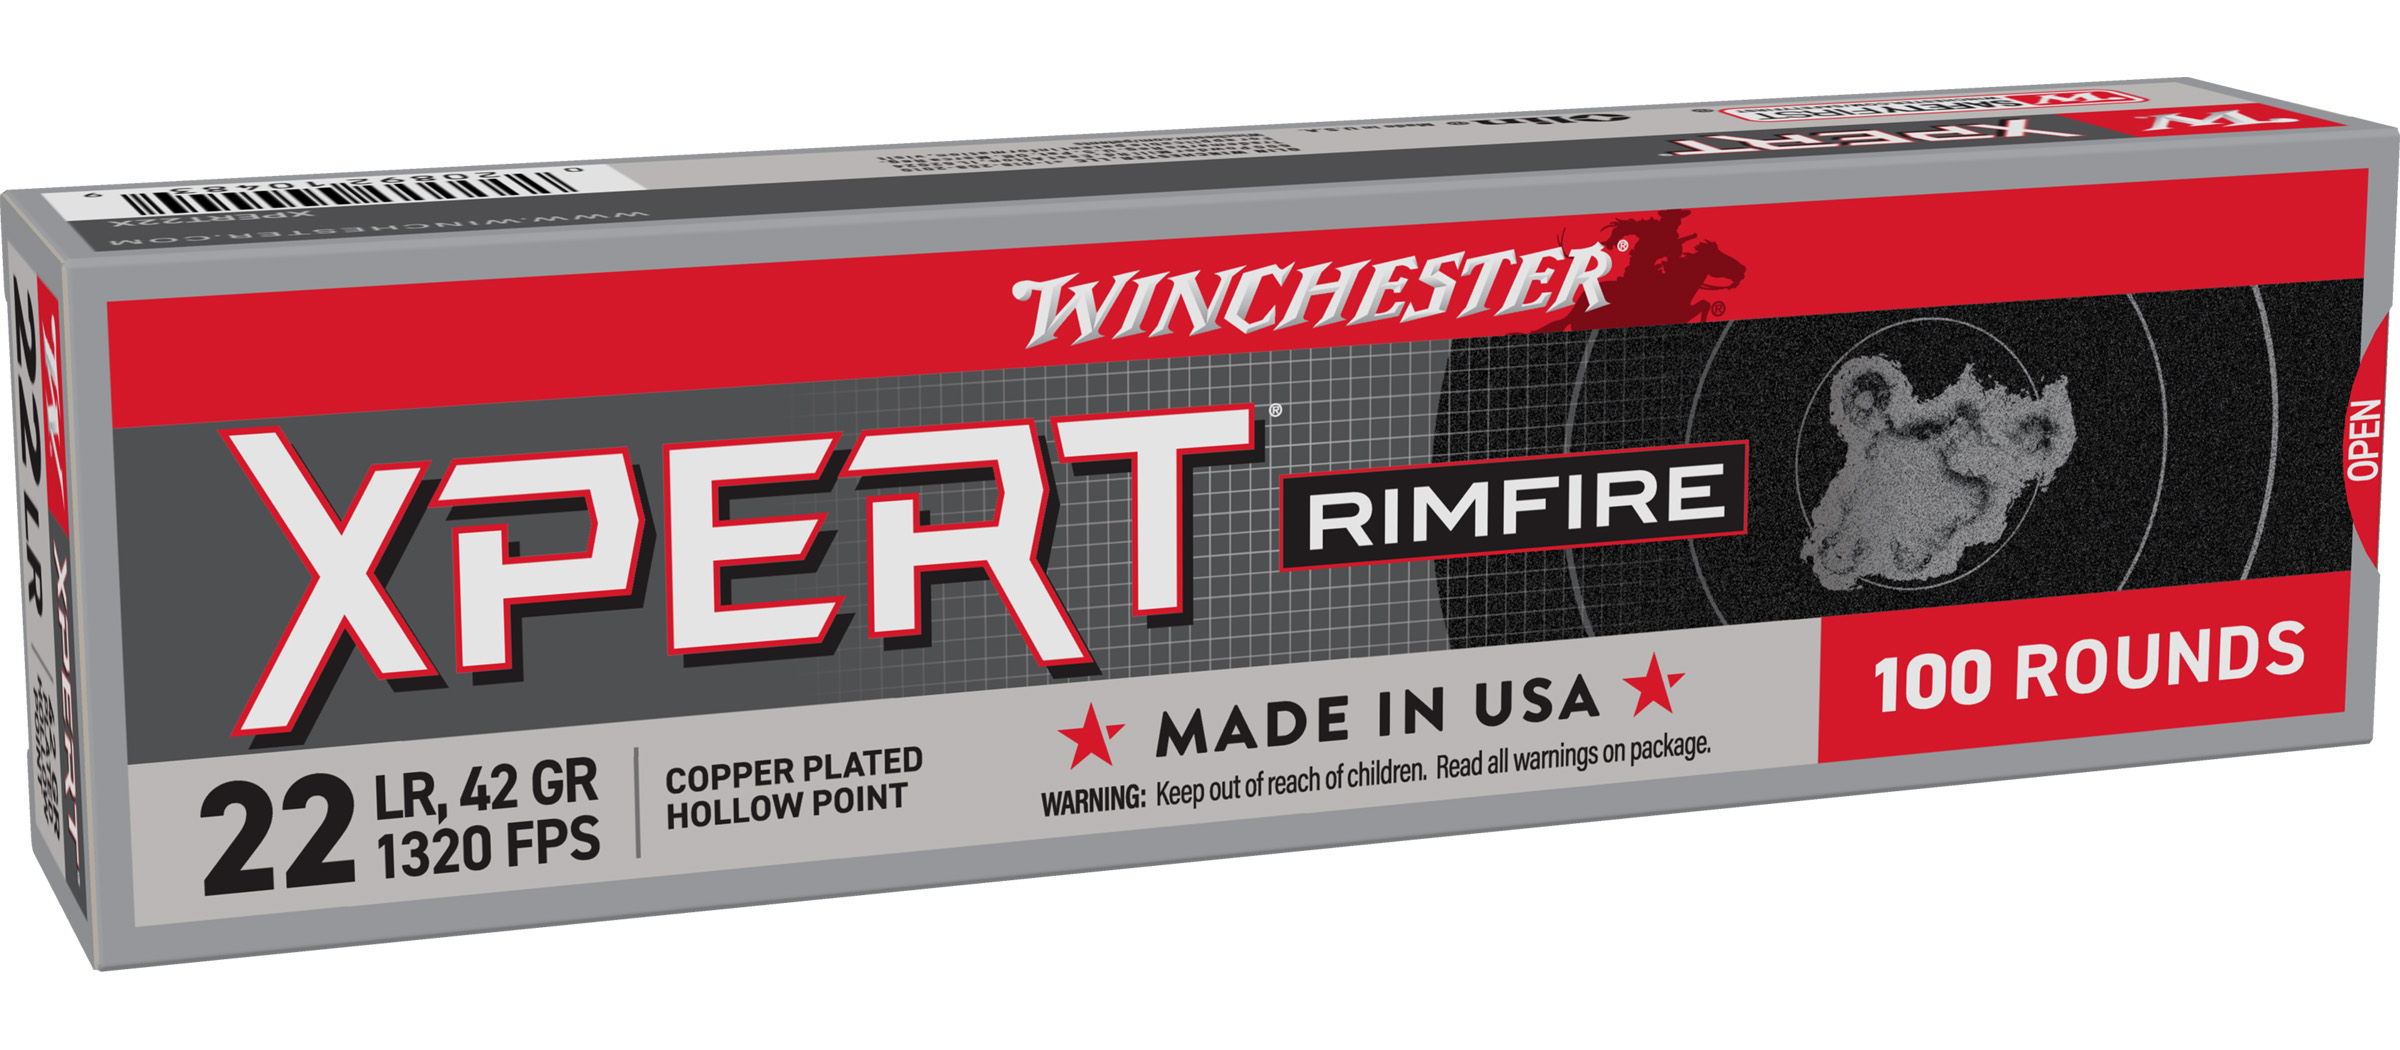 New Winchester XPERT® Rimfire Ammunition, Shipping Now